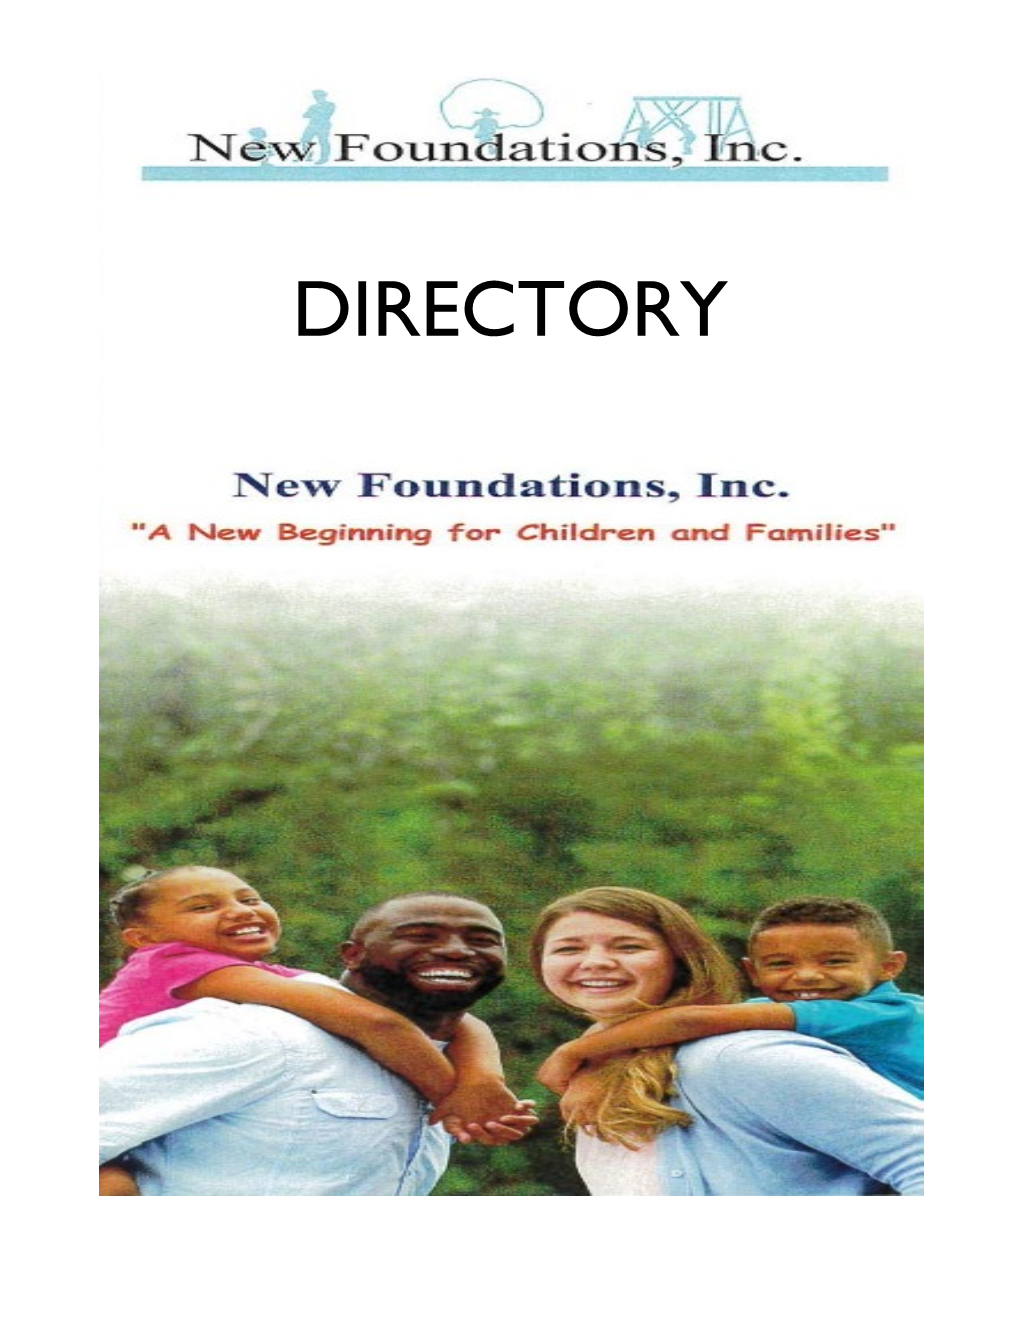 Download Our Cultural Diversity Directory (PDF)